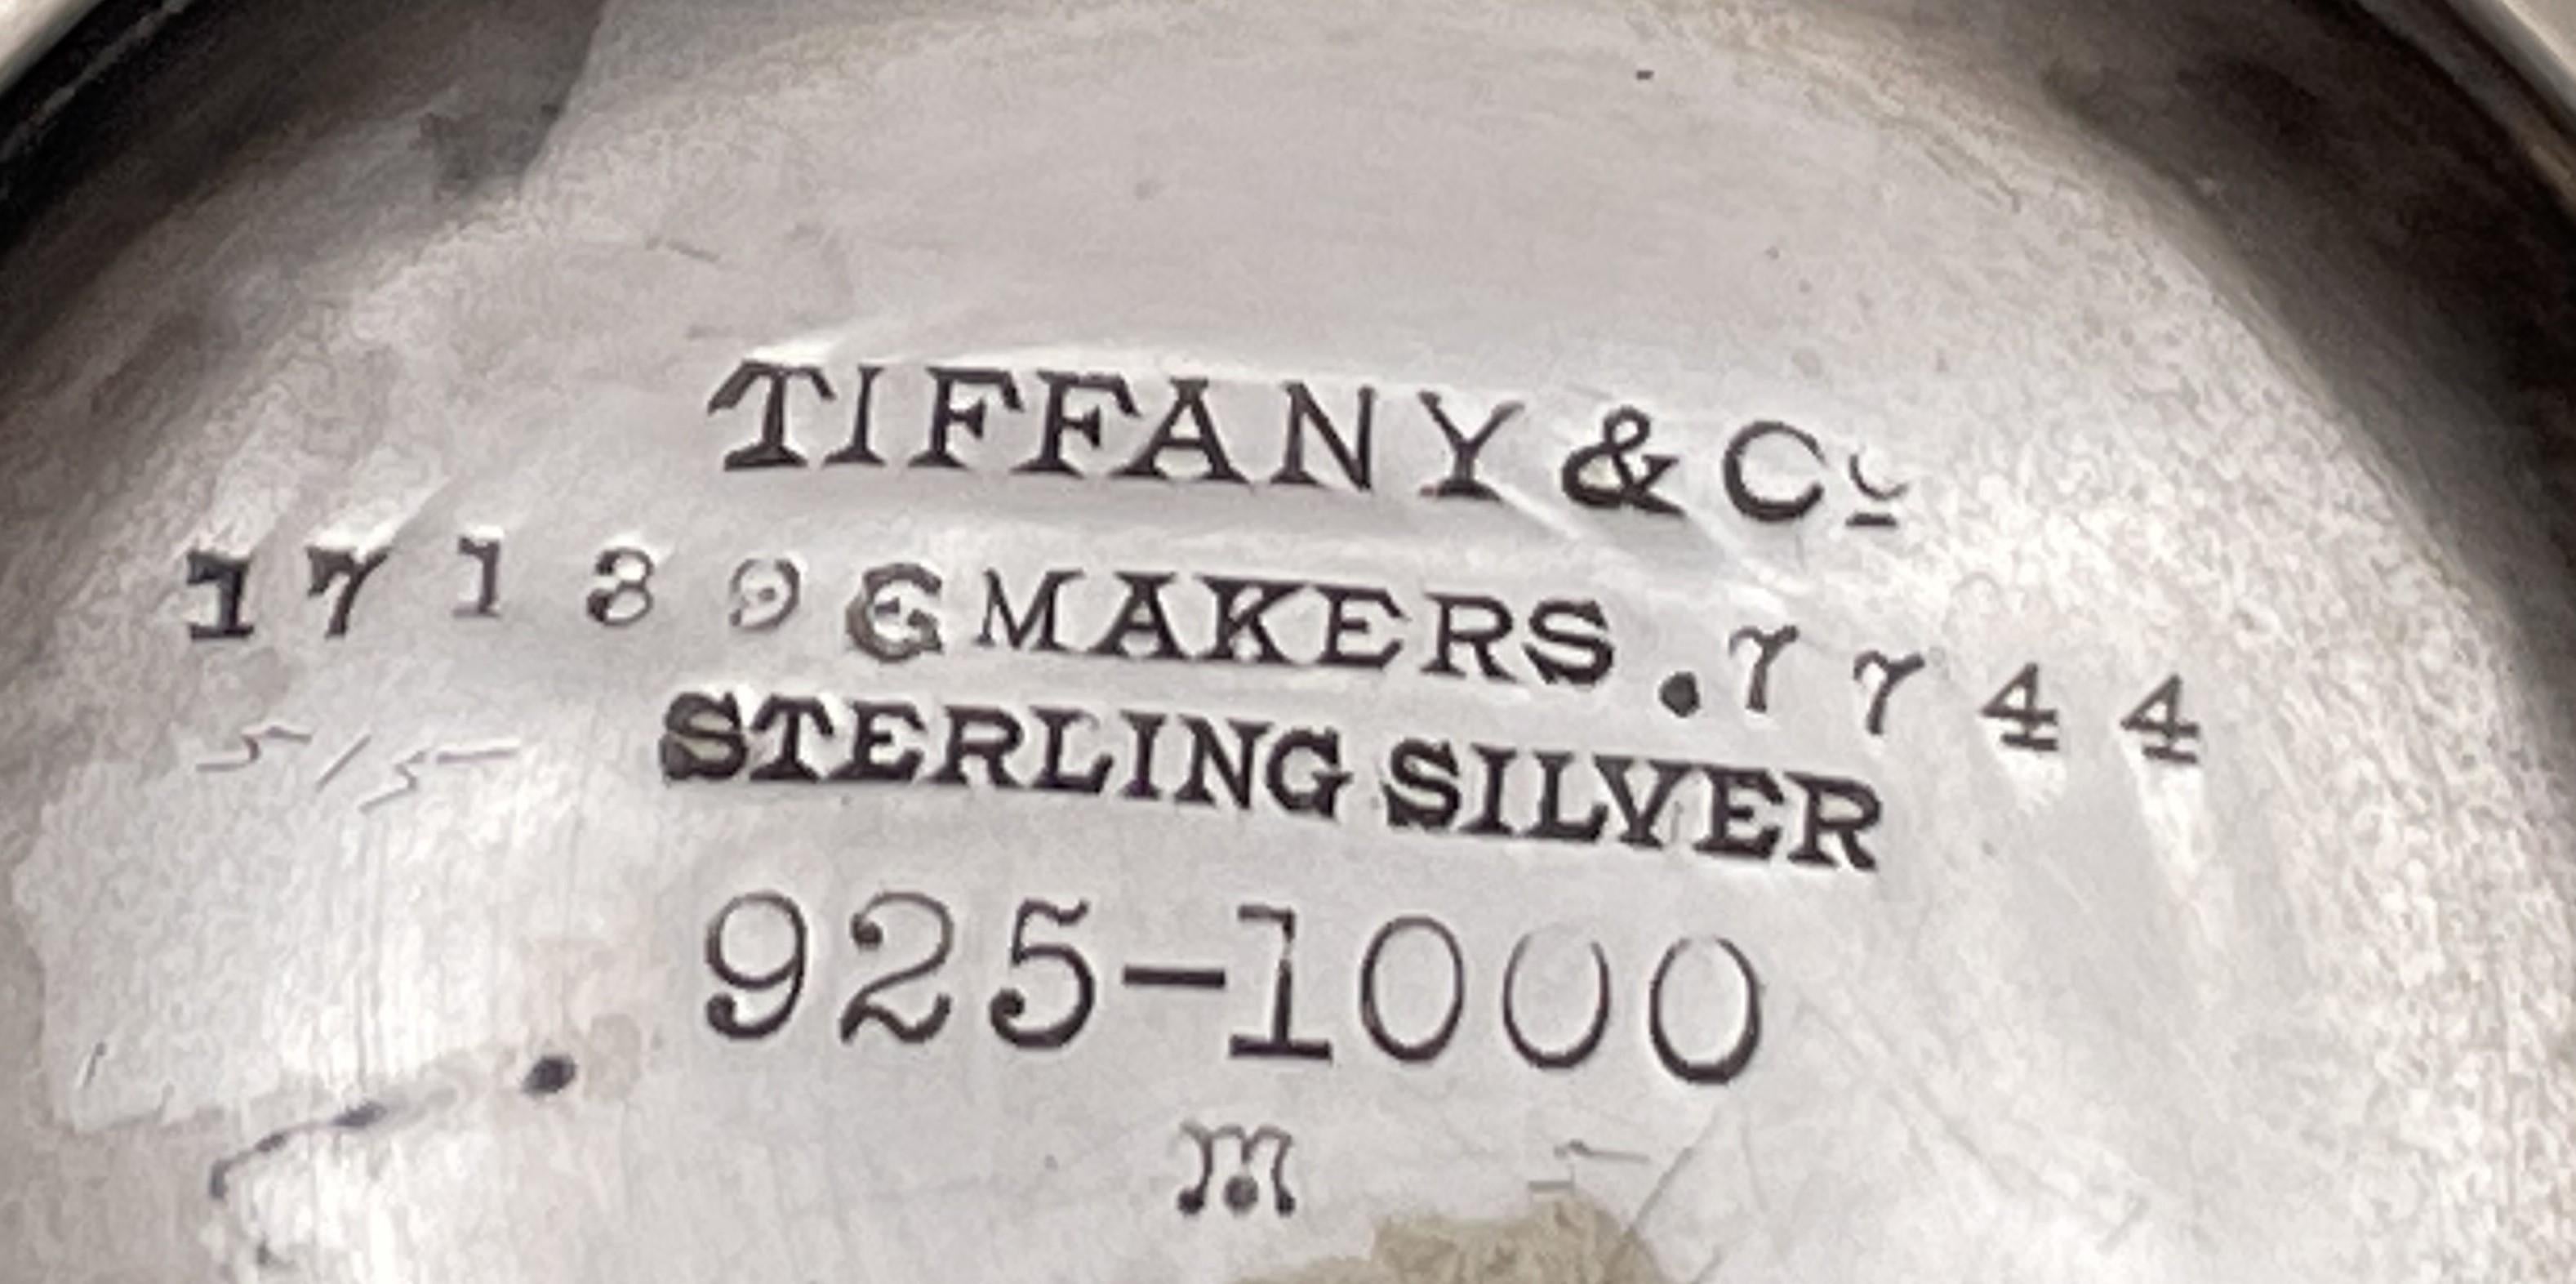 Tiffany & Co. Sterlingsilber-Kinderbecher aus Sterlingsilber, 1908, „The Mouse Ran Up the Clock“ im Angebot 2